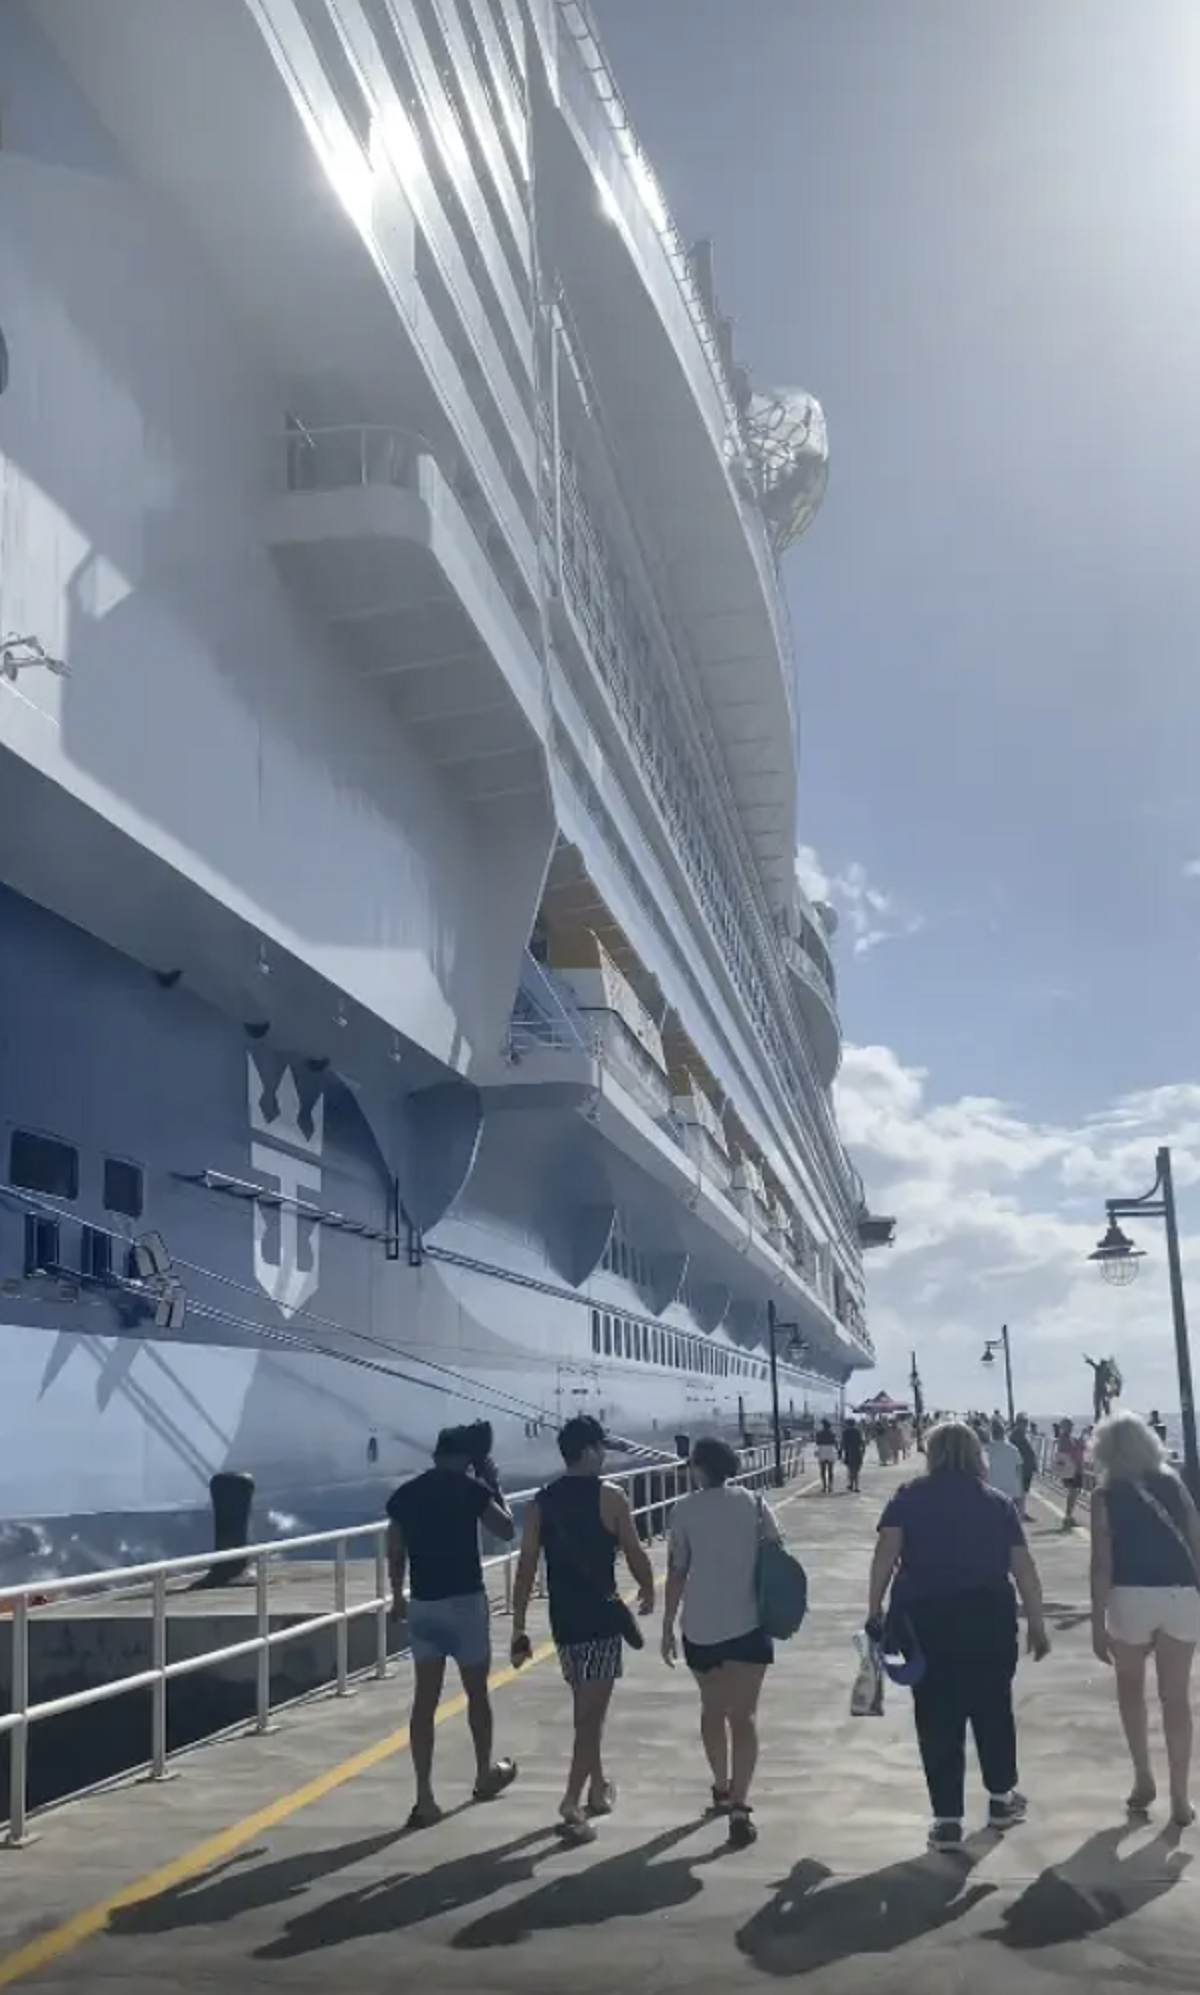 The World’s Largest Cruise Ship, Icon of the Seas